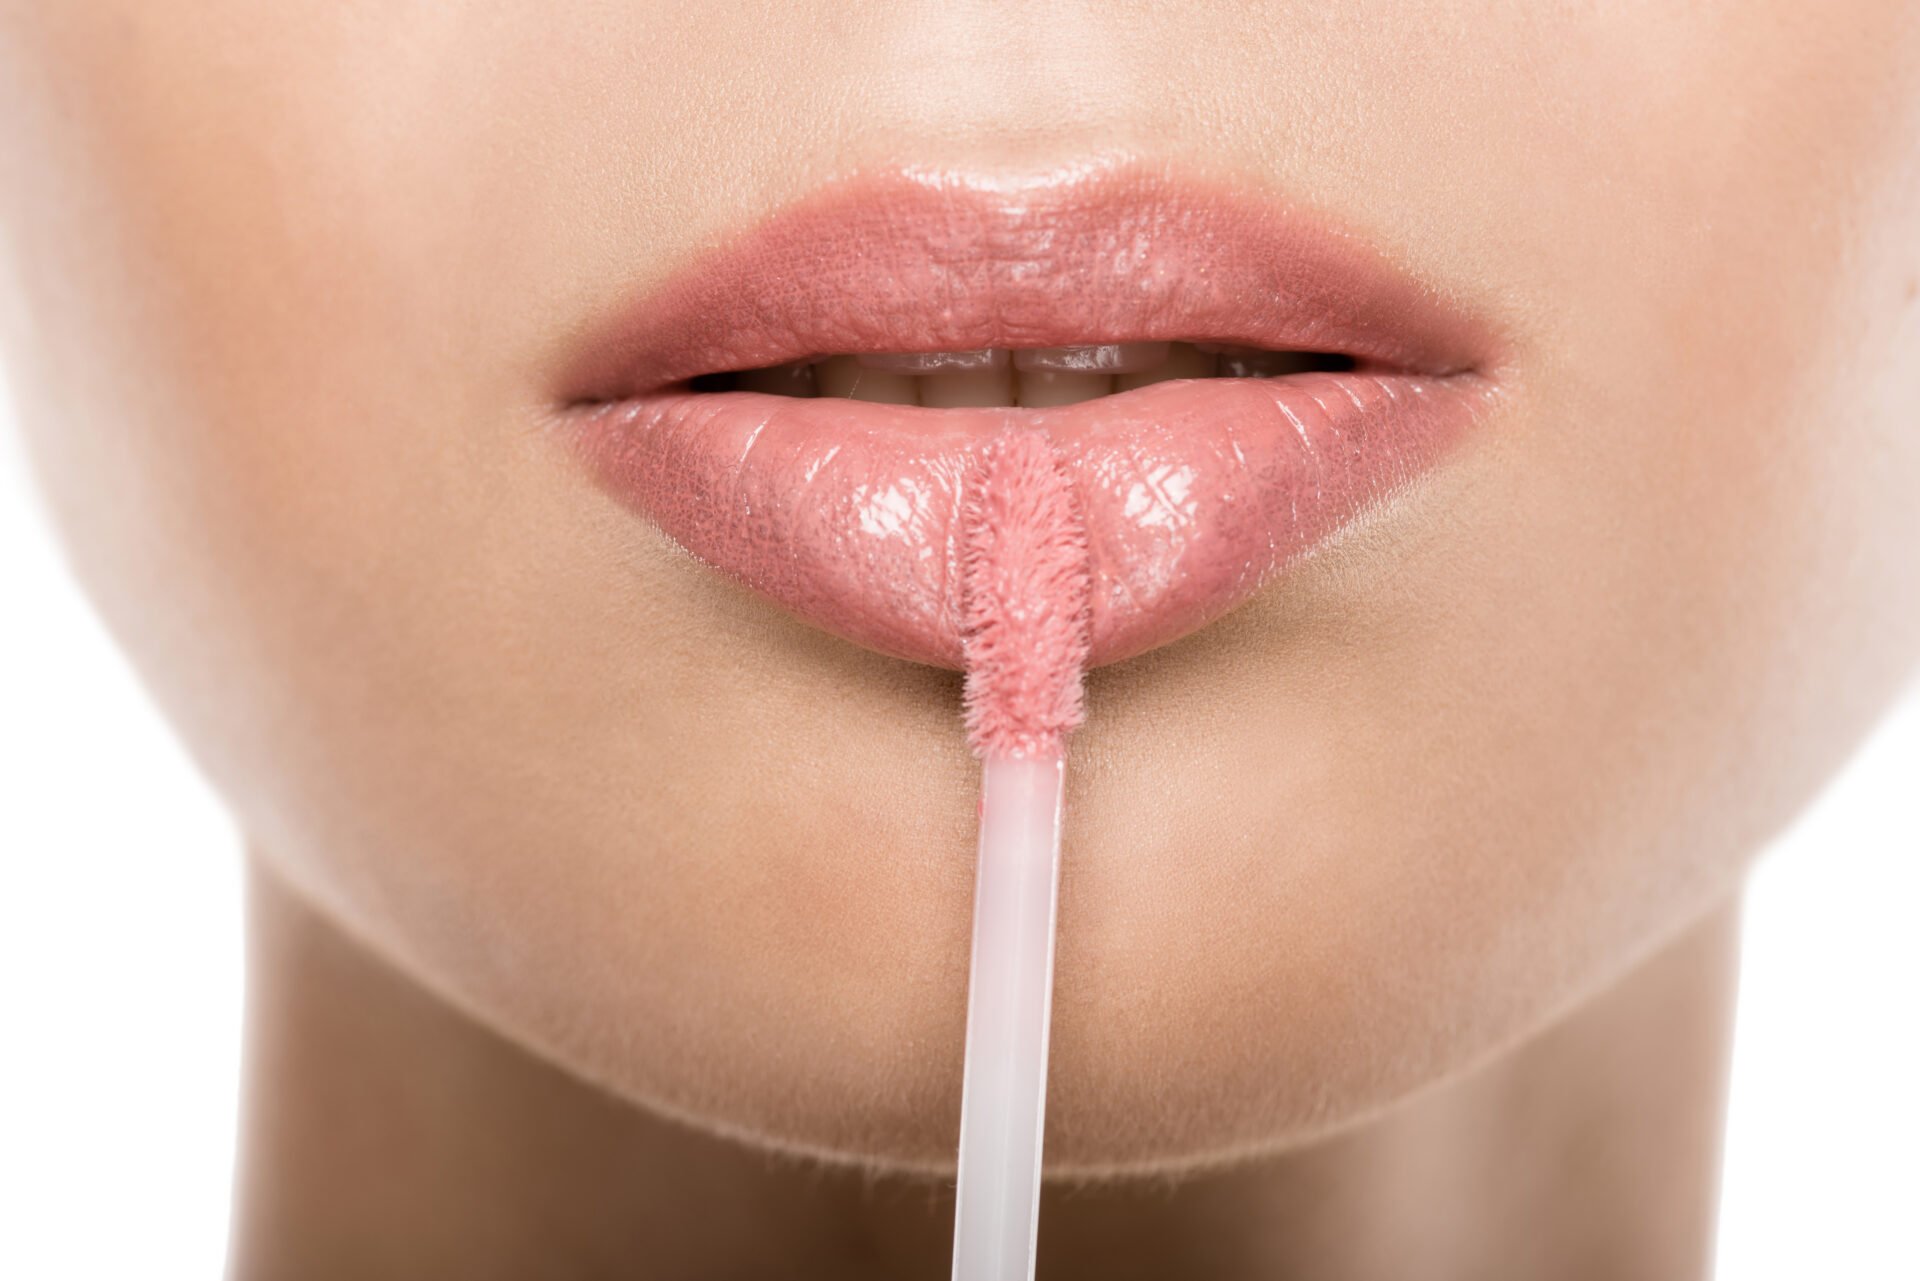 Avon - Lip-quenching hydration + fresh buildable colour = NEW